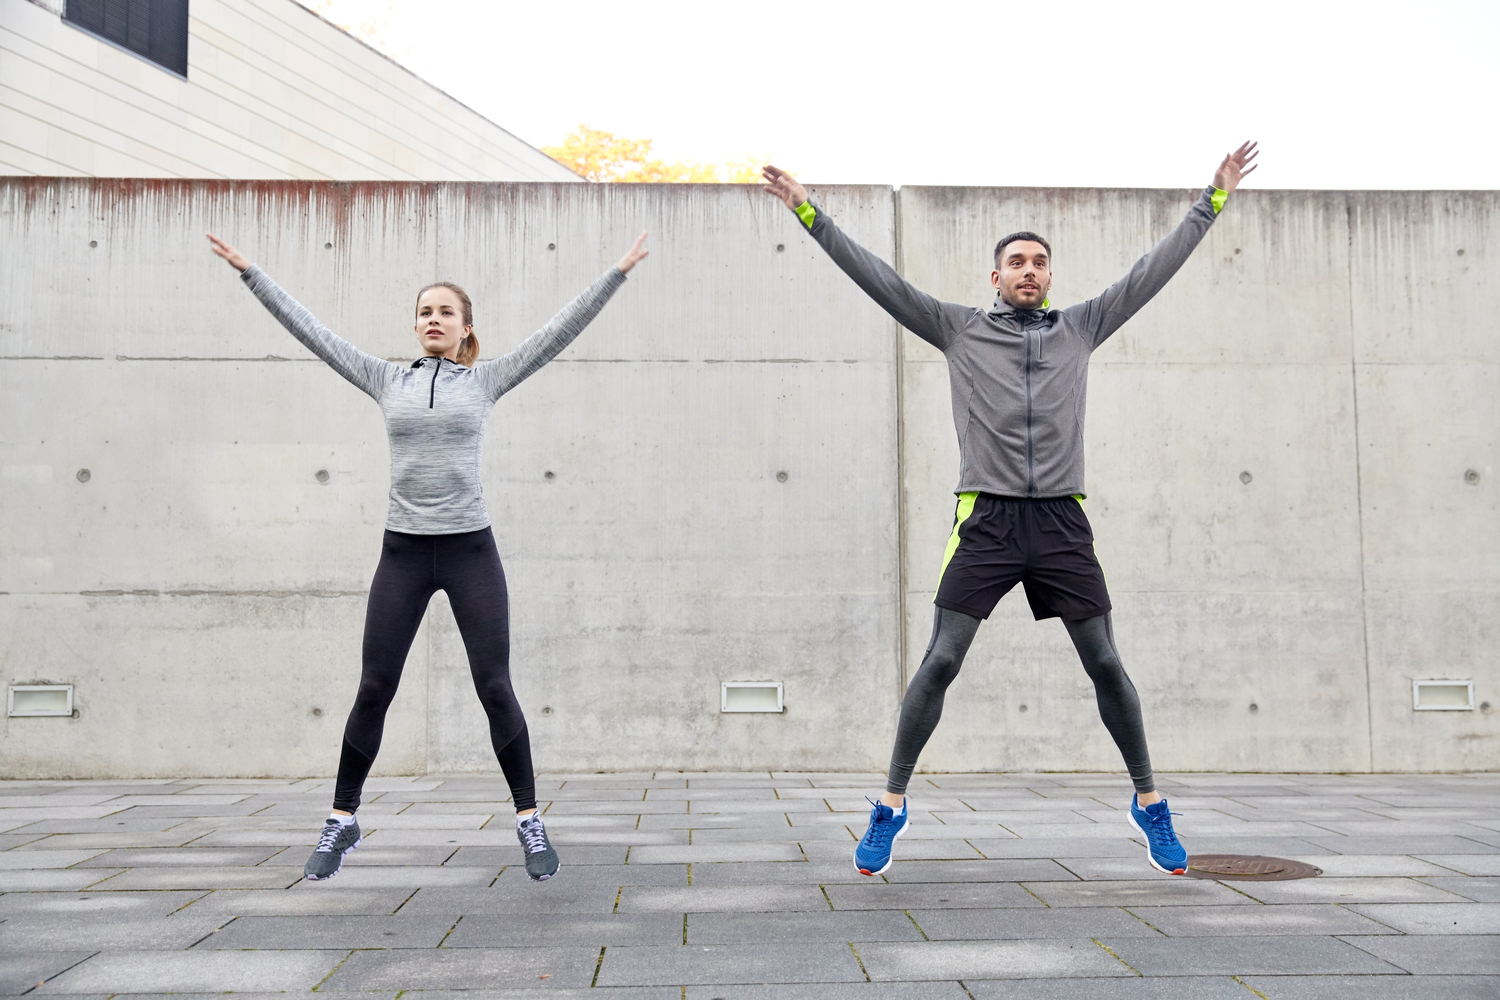 15 Awesome Reasons to Add Jumping to Your Regular Workout Routine